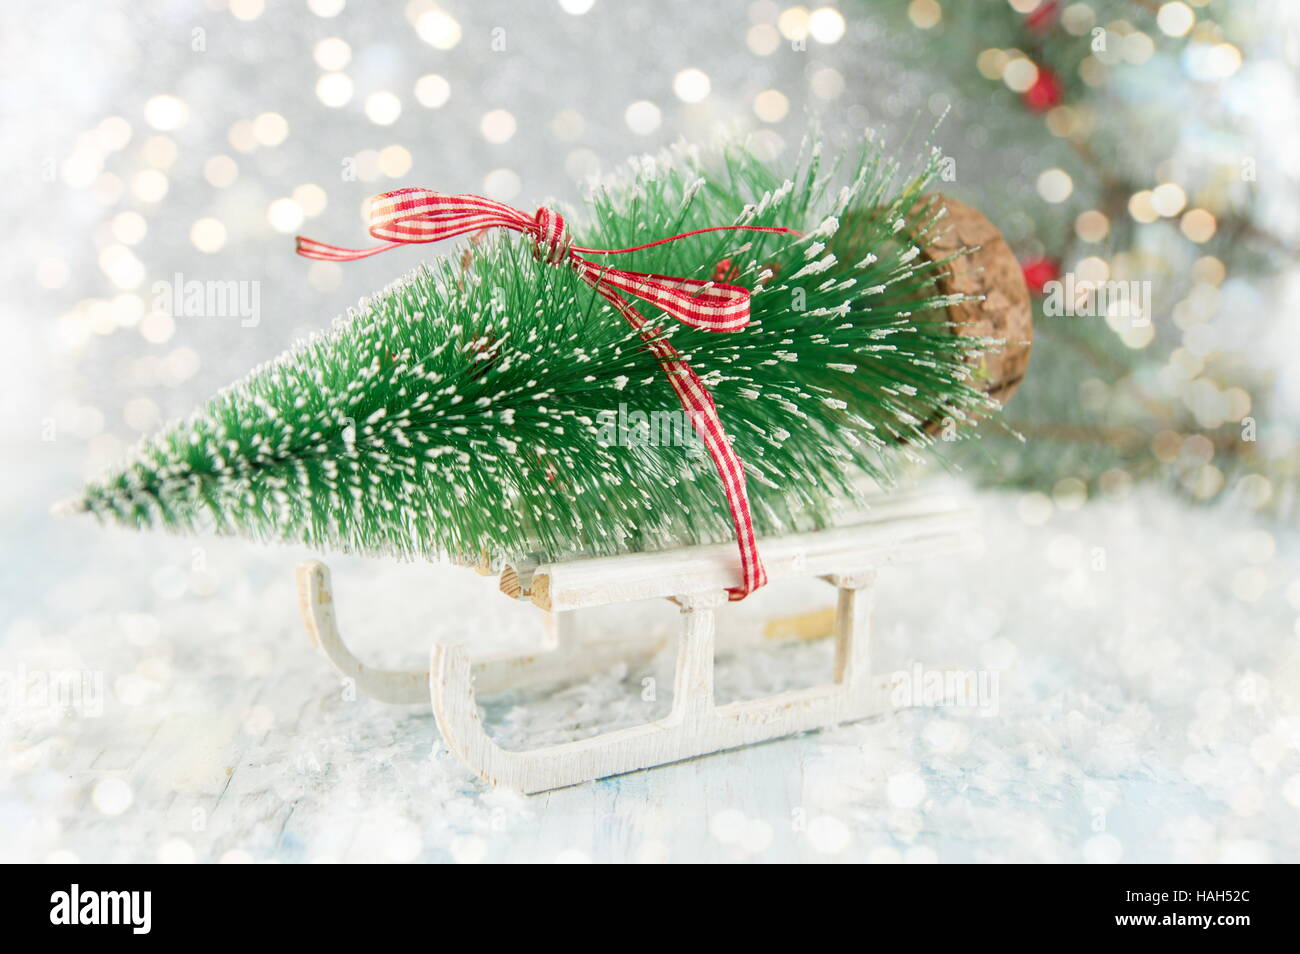 Small sleigh carrying a toy  Christmas tree Stock Photo